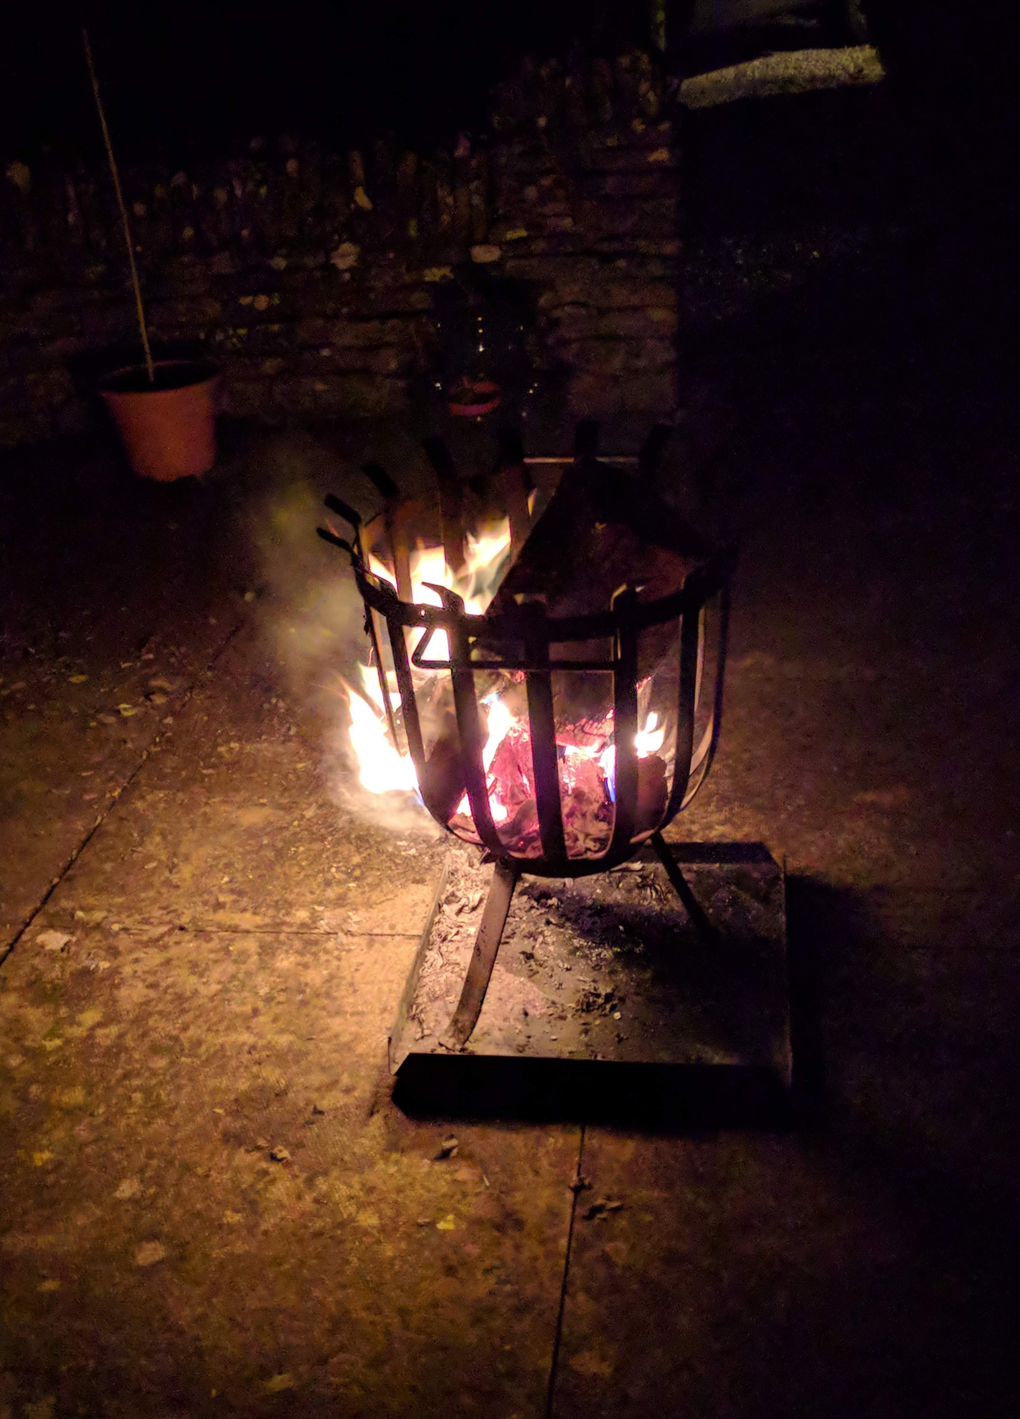 Flames in a brazier on New Year’s Eve.